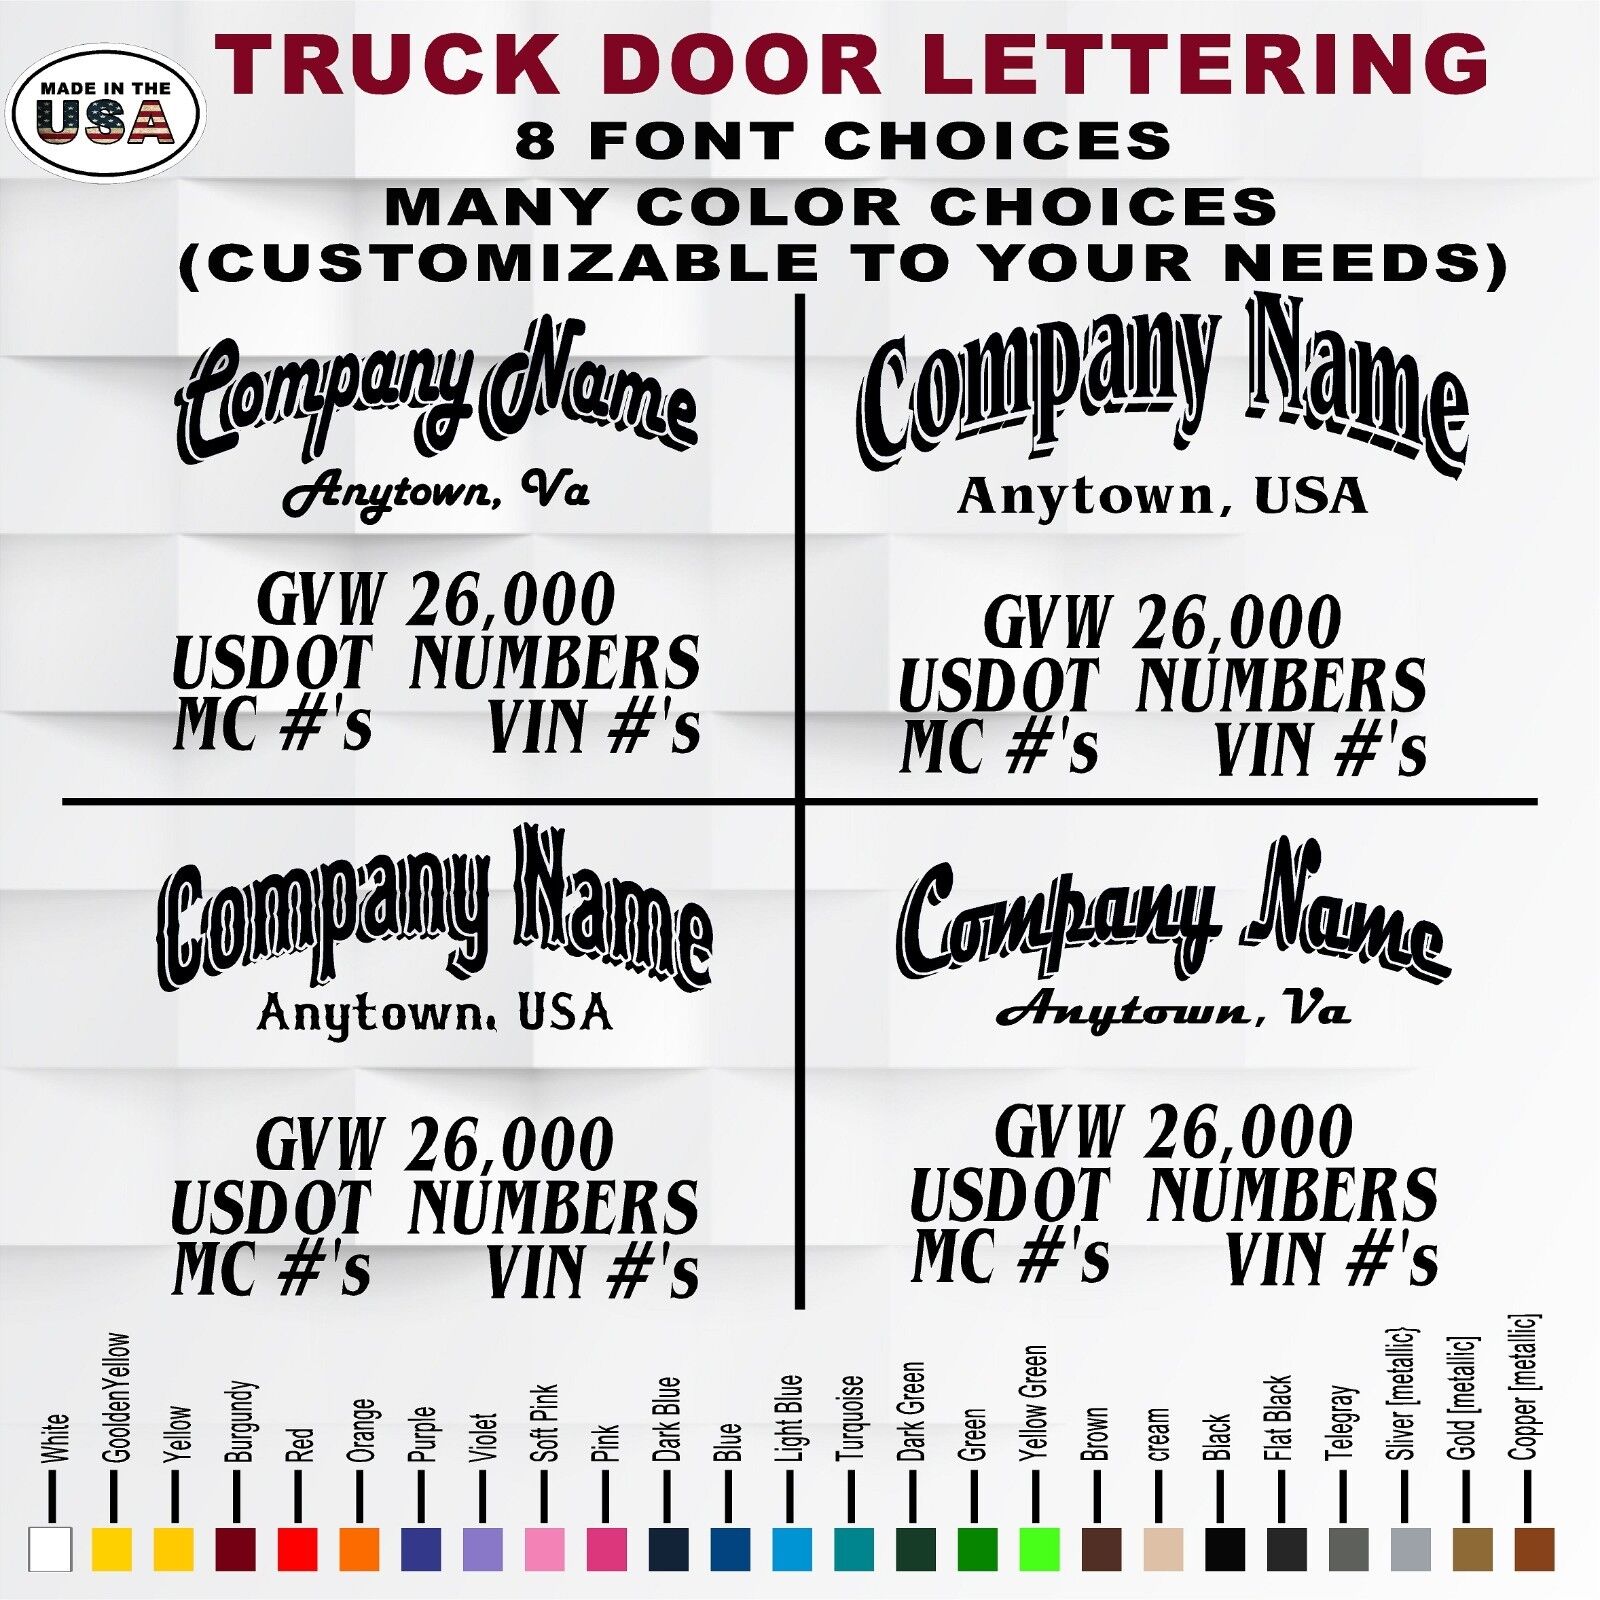 Business Truck Lettering | Semi Truck Door Lettering Company Name Truck Decal 1